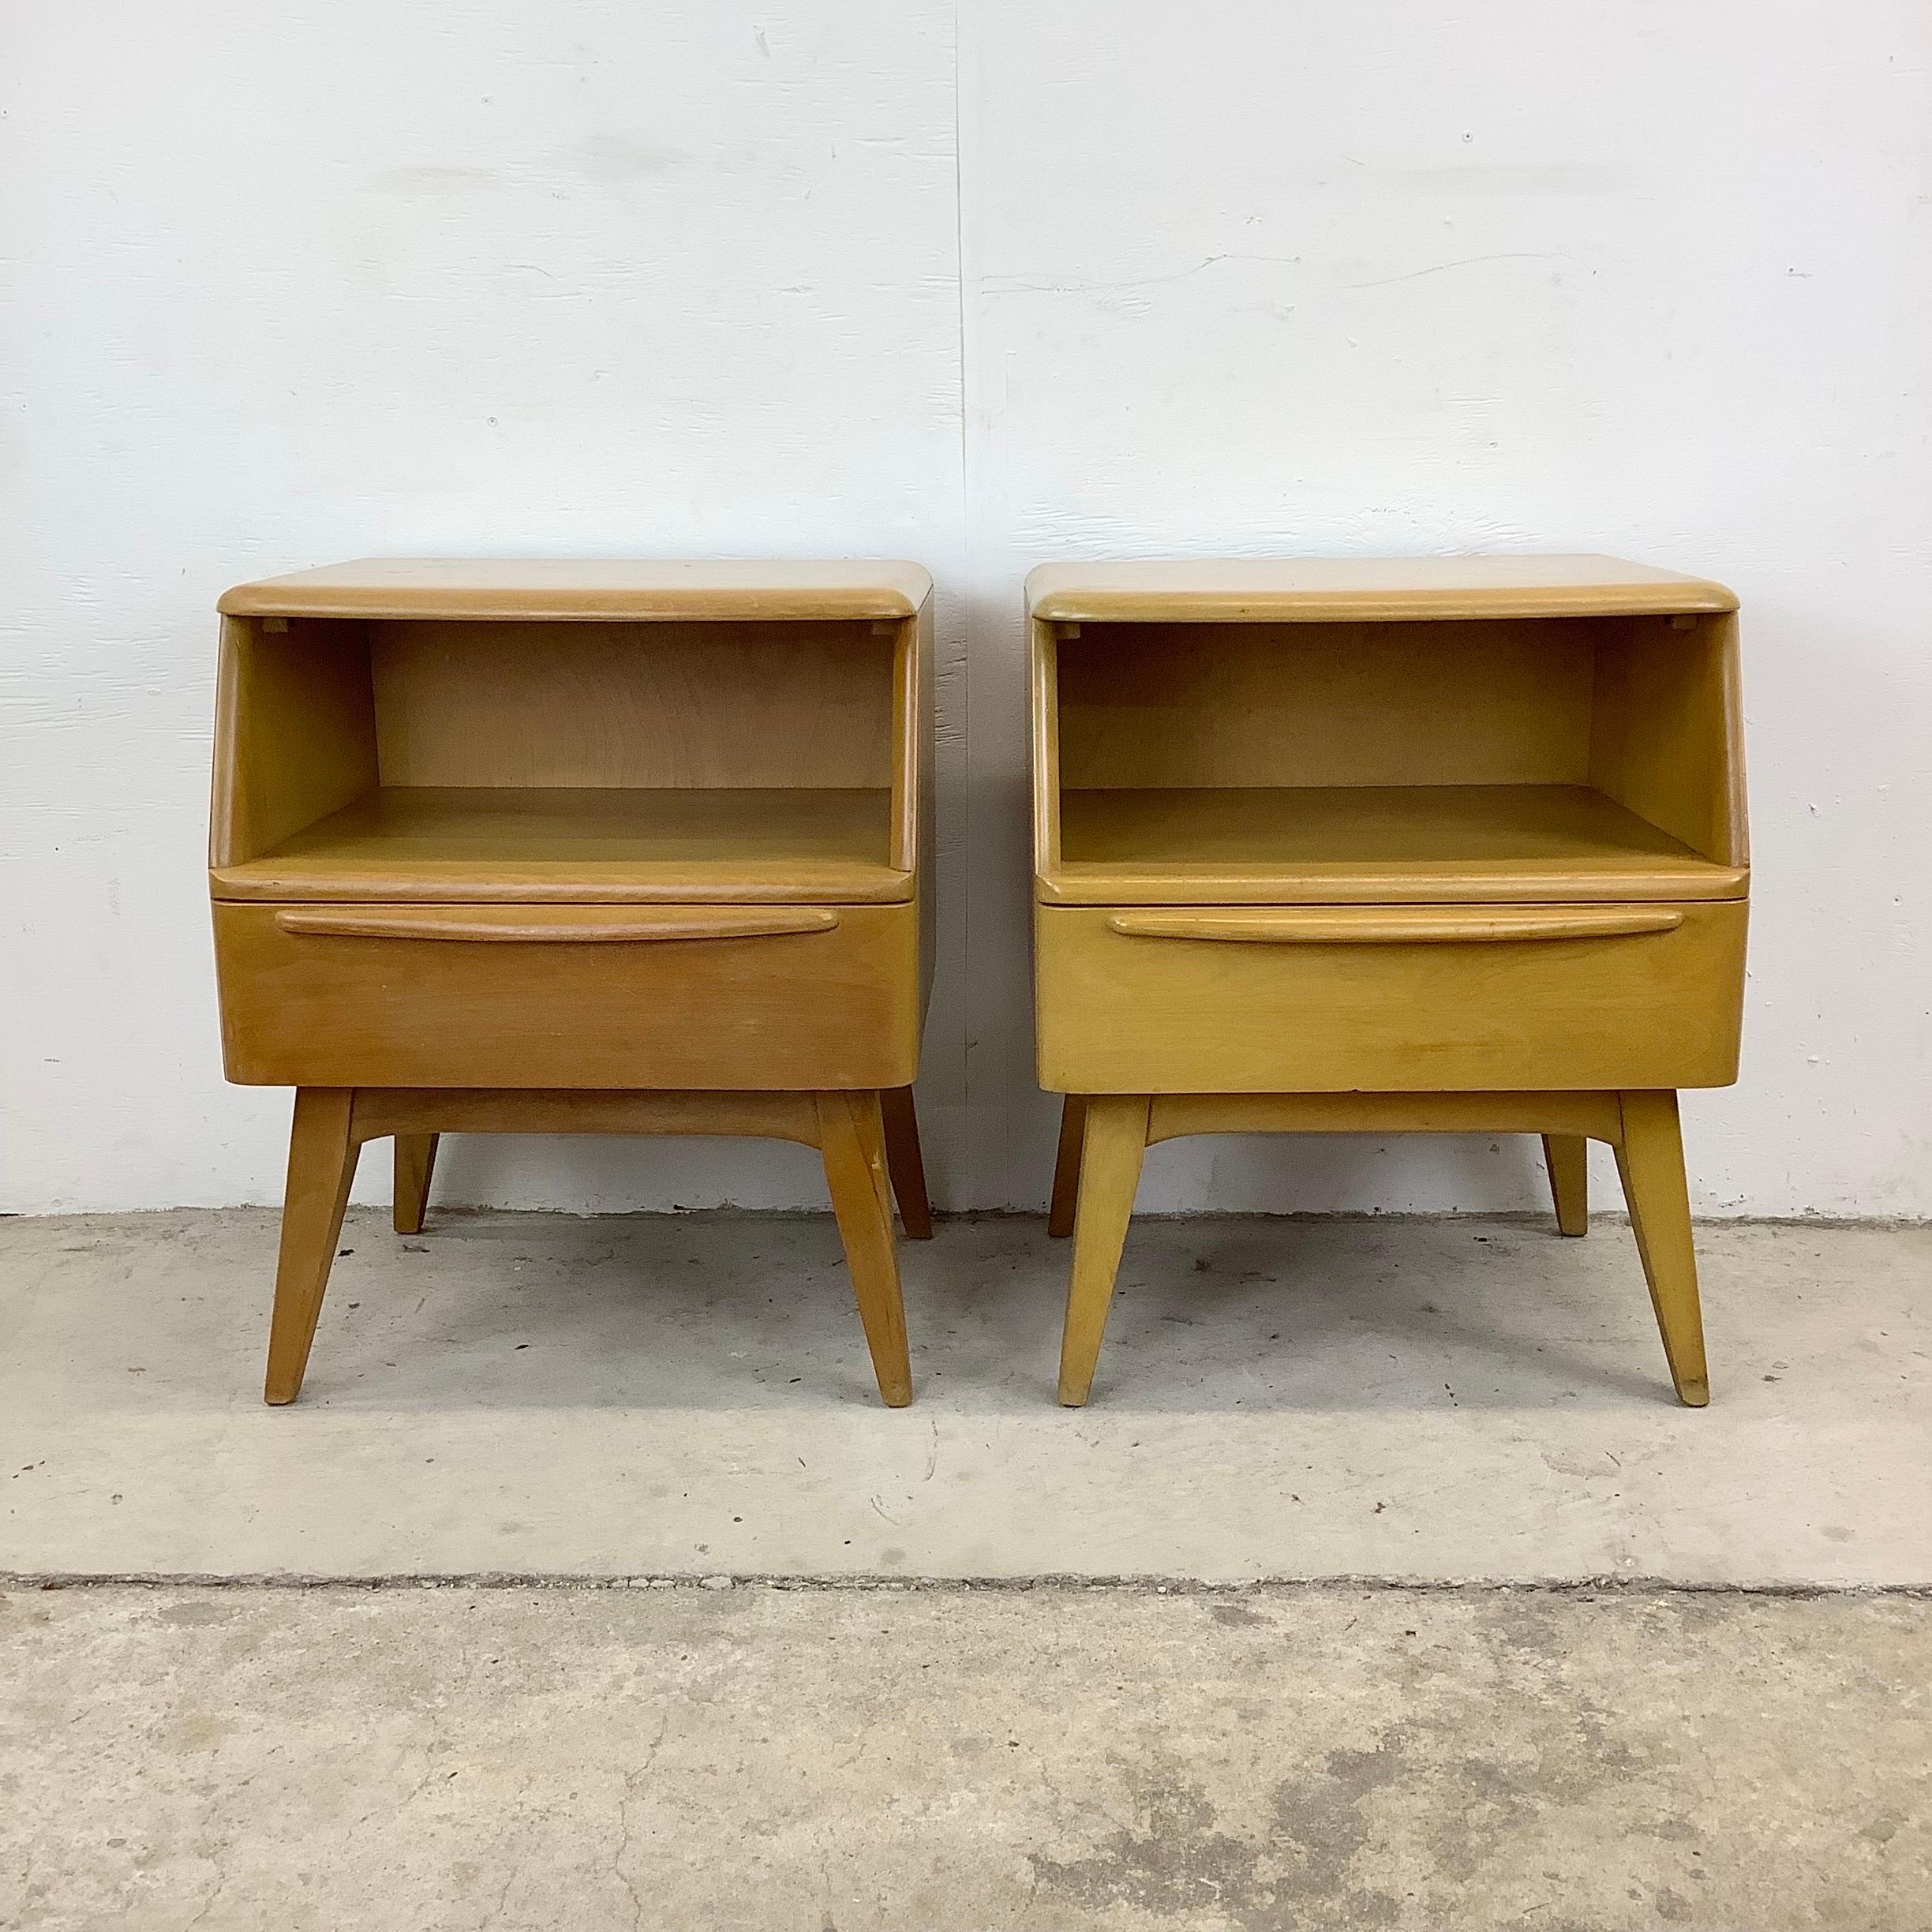 Mid-Century Heywood Wakefield Nightstands- a Pair

This stunning pair of matching nightstands feature solid birch finish and construction with unique mid-century design. The striking legs, sculpted wooden drawer pulls, open cubby storage, and